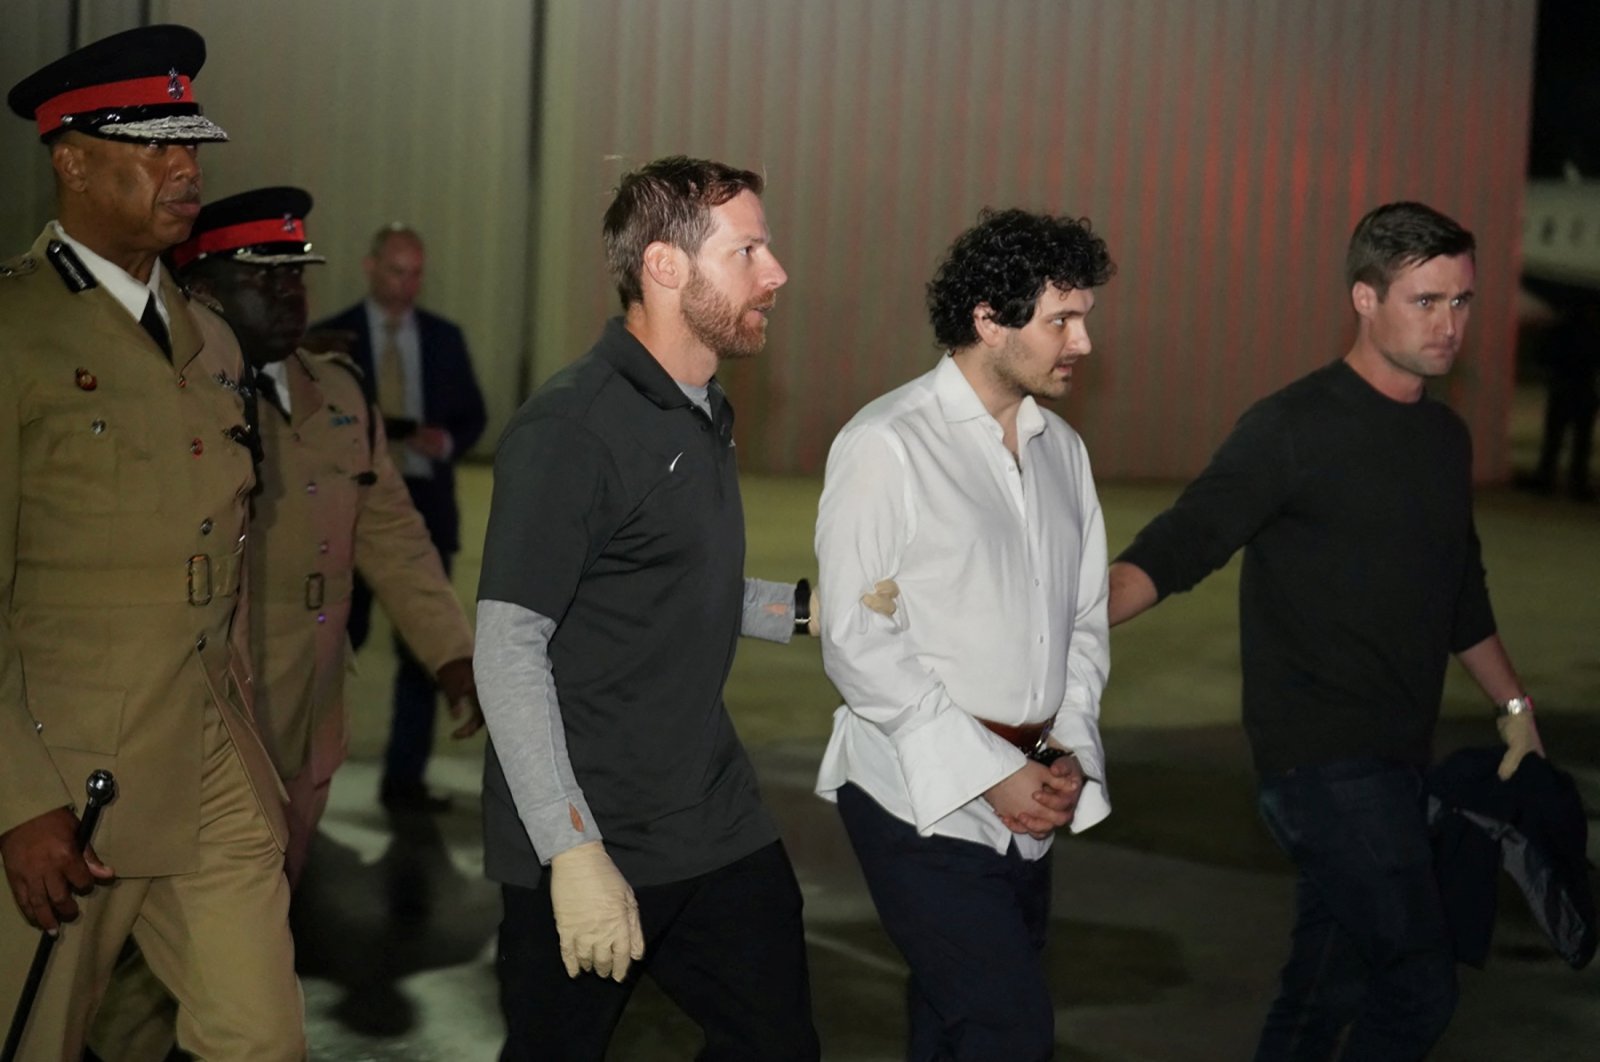 Sam Bankman-Fried, founder and former CEO of crypto currency exchange FTX, is walked in handcuffs to a plane during his extradition to the United States at Lynden Pindling international airport in Nassau, Bahamas, Dec. 21, 2022. (Reuters Photo)